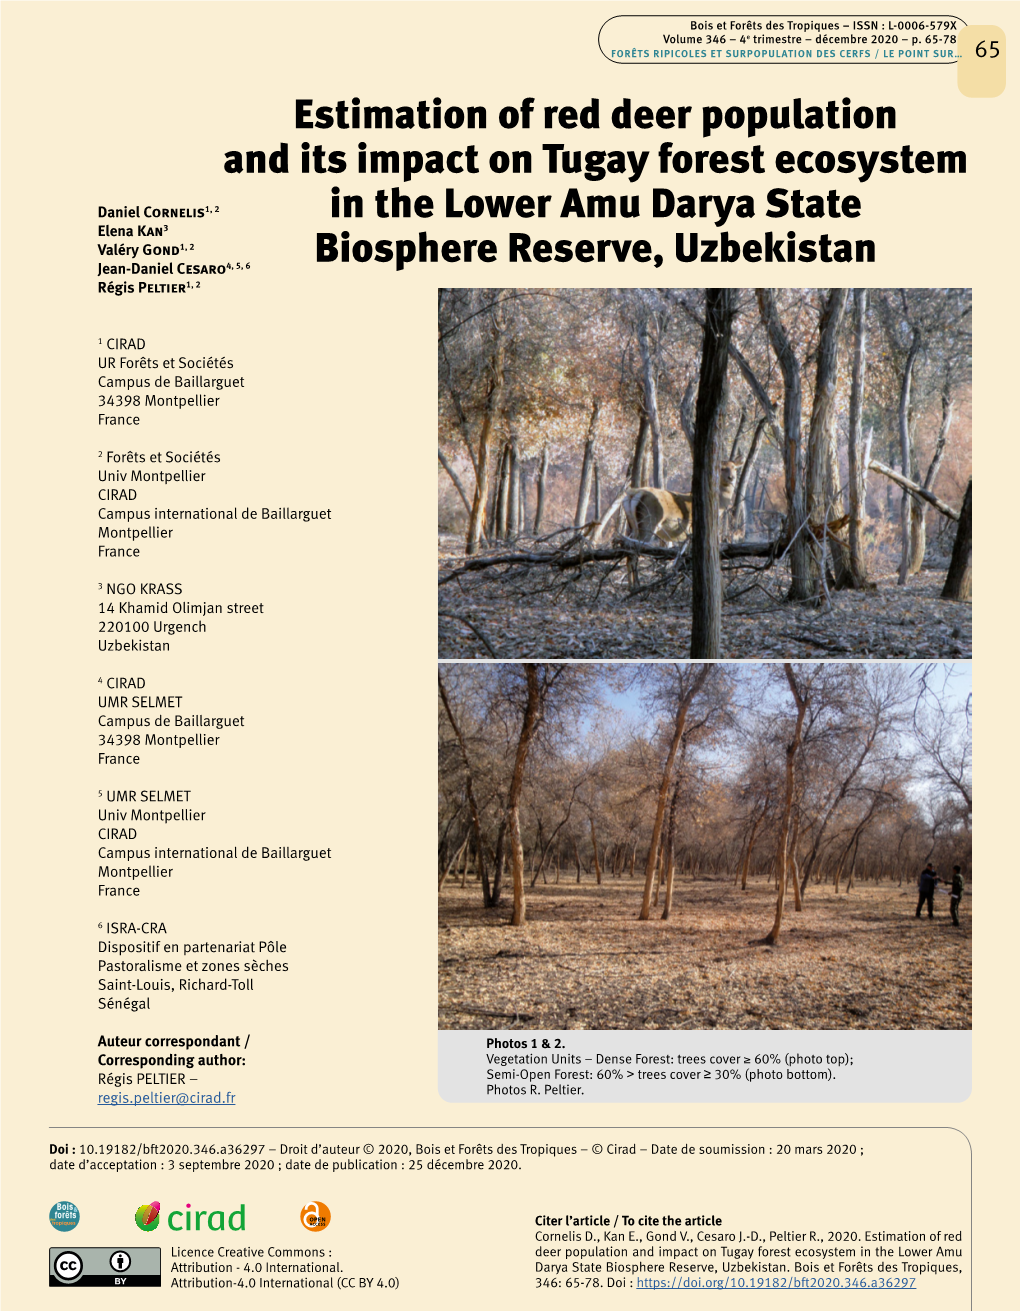 Estimation of Red Deer Population and Its Impact on Tugay Forest Ecosystem